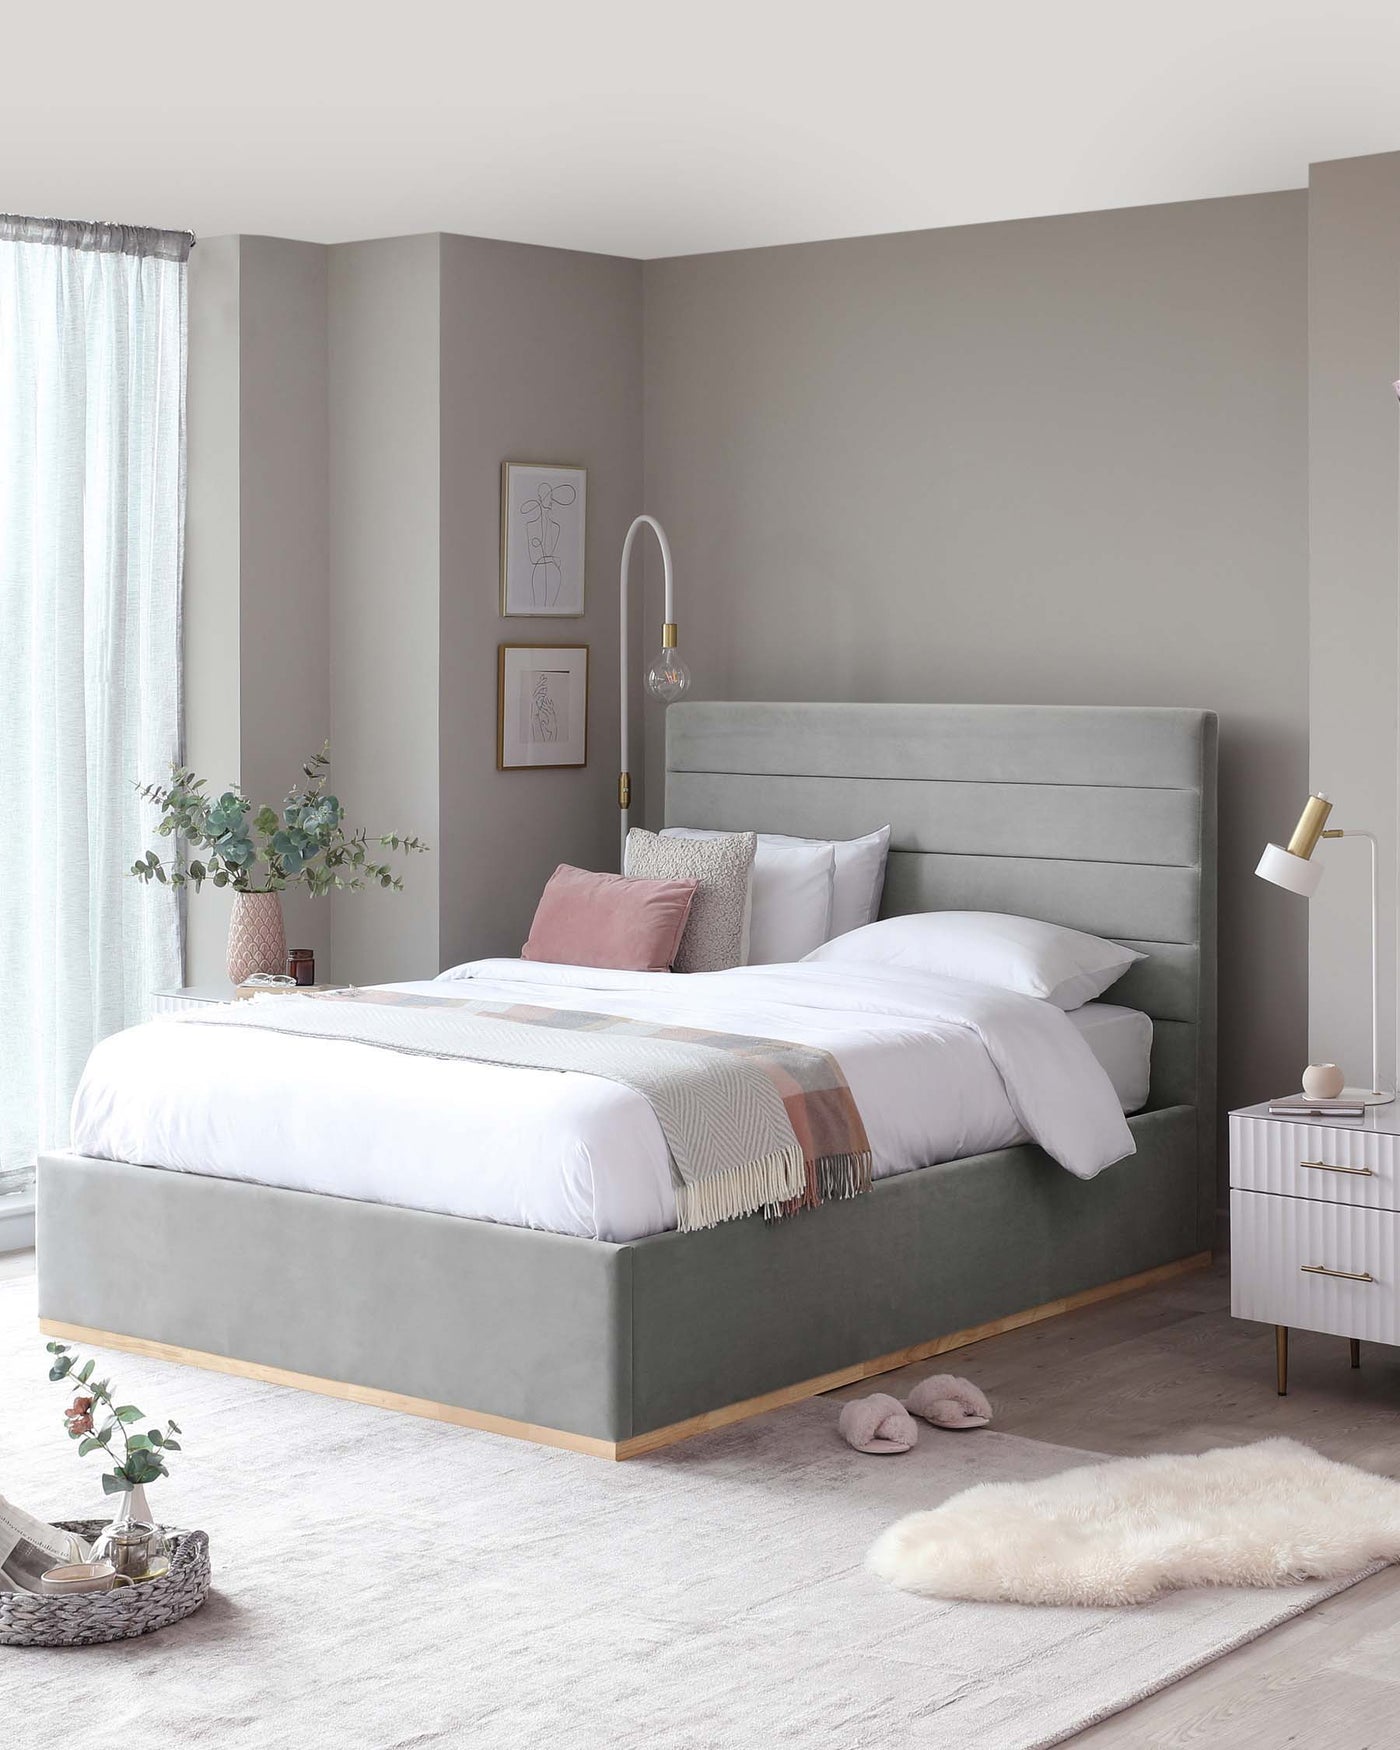 Elegant bedroom showcasing a large, contemporary upholstered bed frame with a grey headboard, flanked by a modern white bedside table with gold accents. A plush, creamy area rug lies on the floor by the bed.